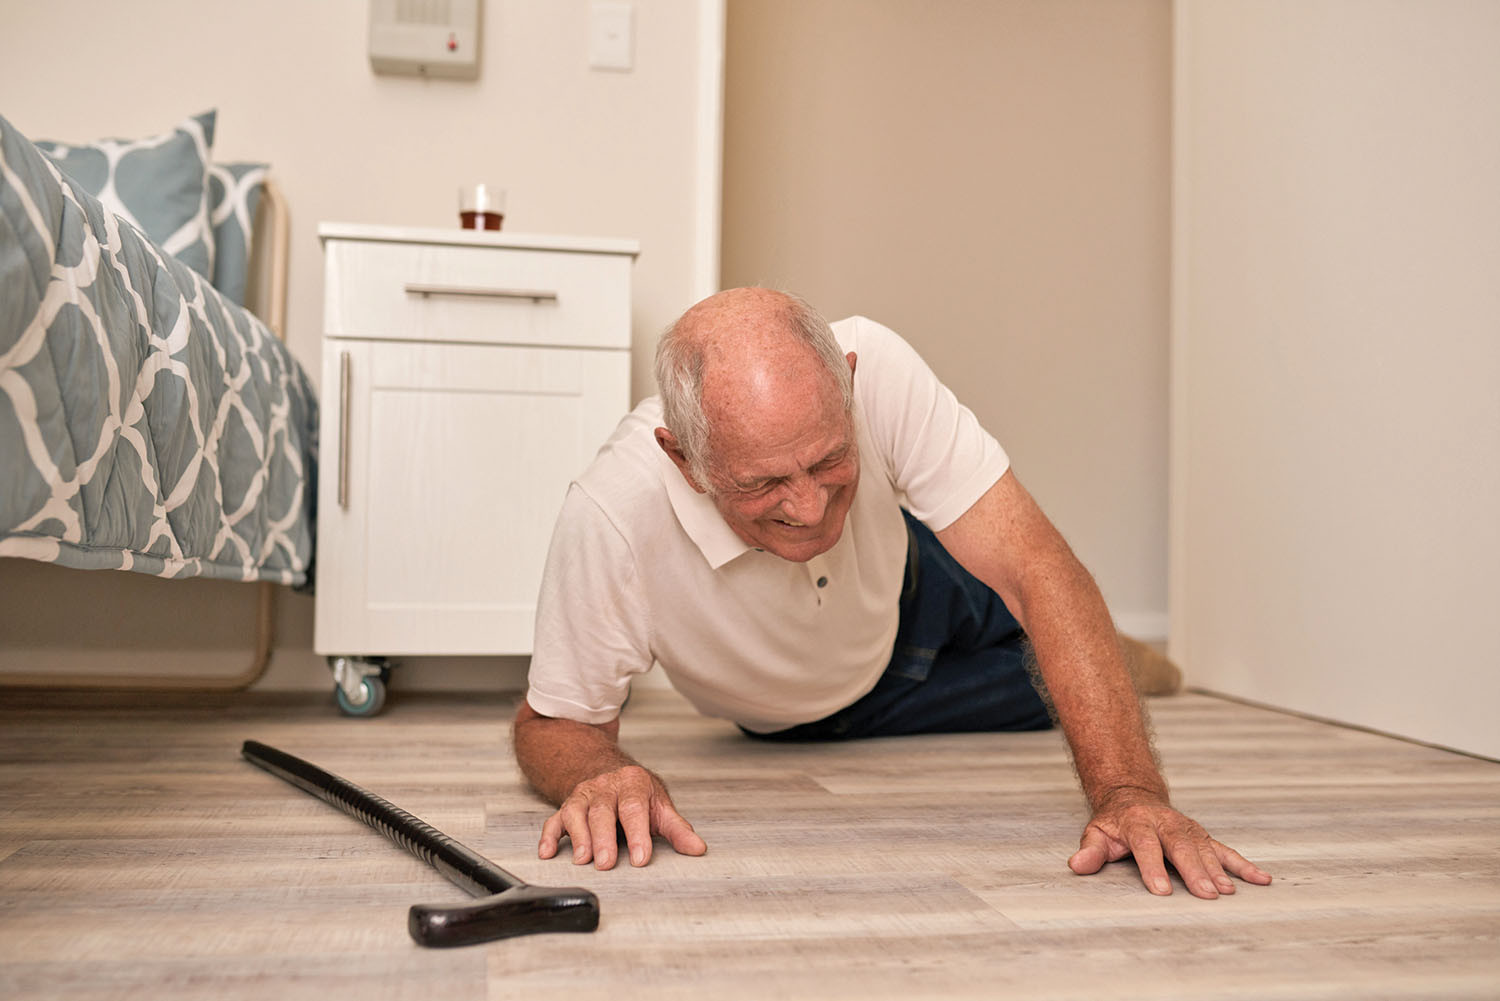 photo of a senior man who has fallen in his bedroom, cane is on the floor next to him and he is trying to push himself up while grimacing in pain